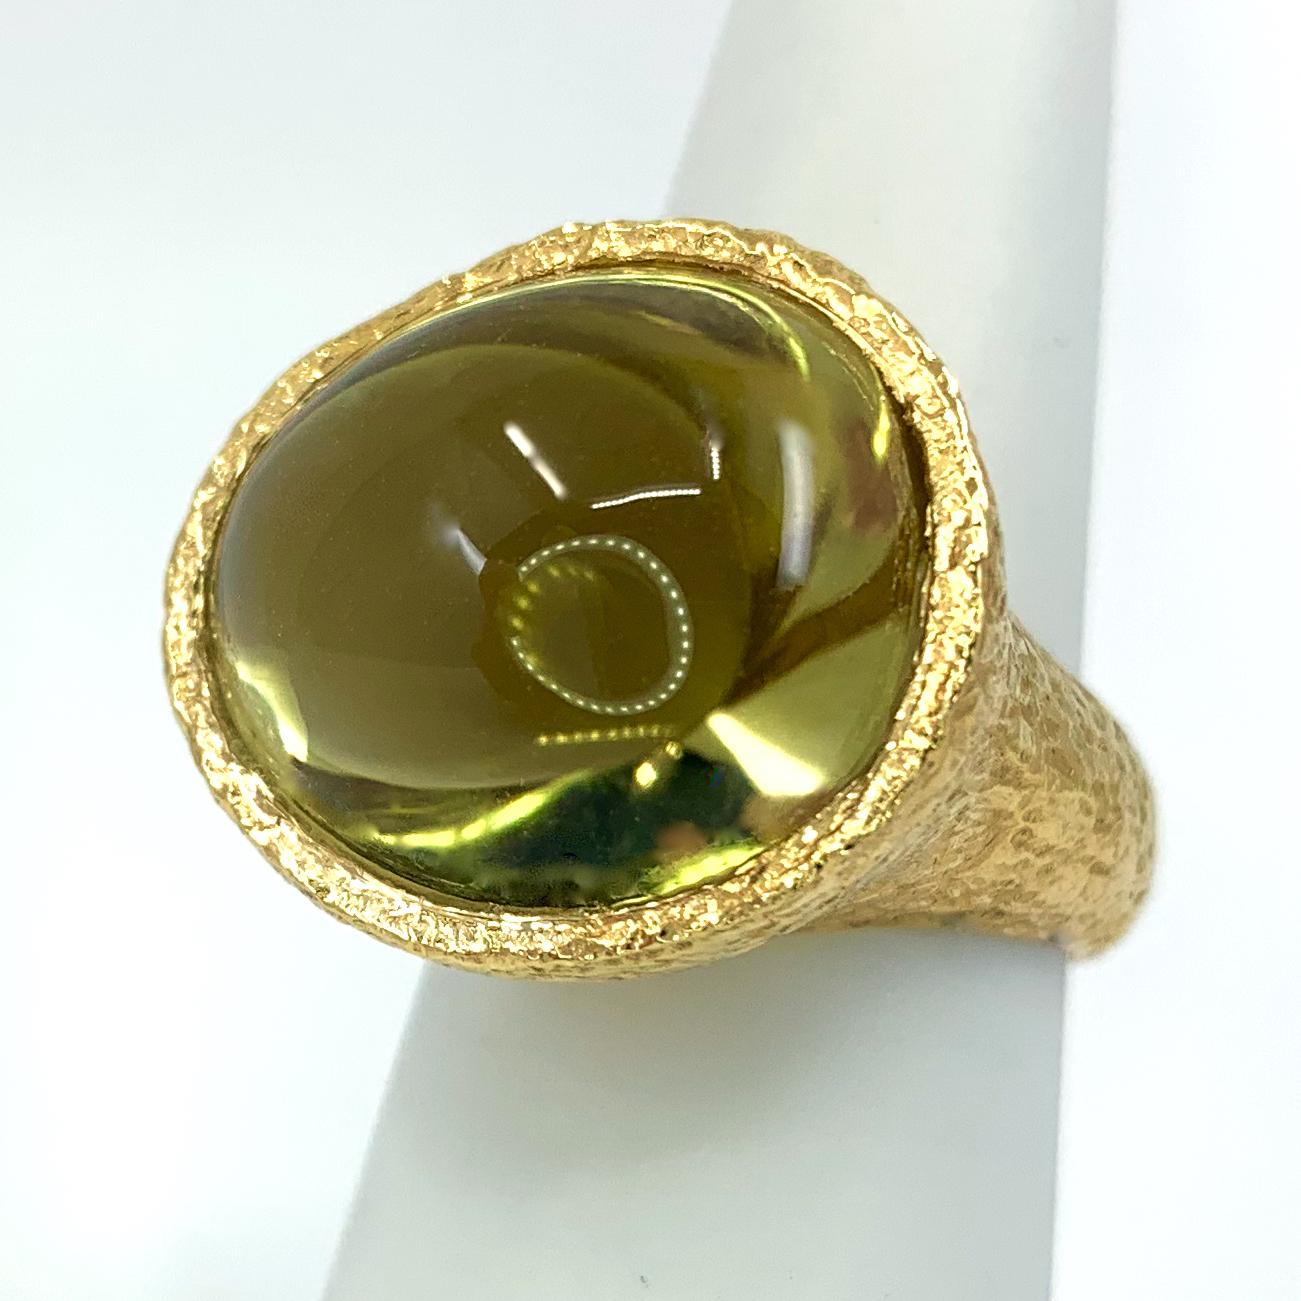 Contemporary 26 Carat Lemon Citrine Cabochon in Textured 18 Karat Gold Ring w Diamond Accent For Sale